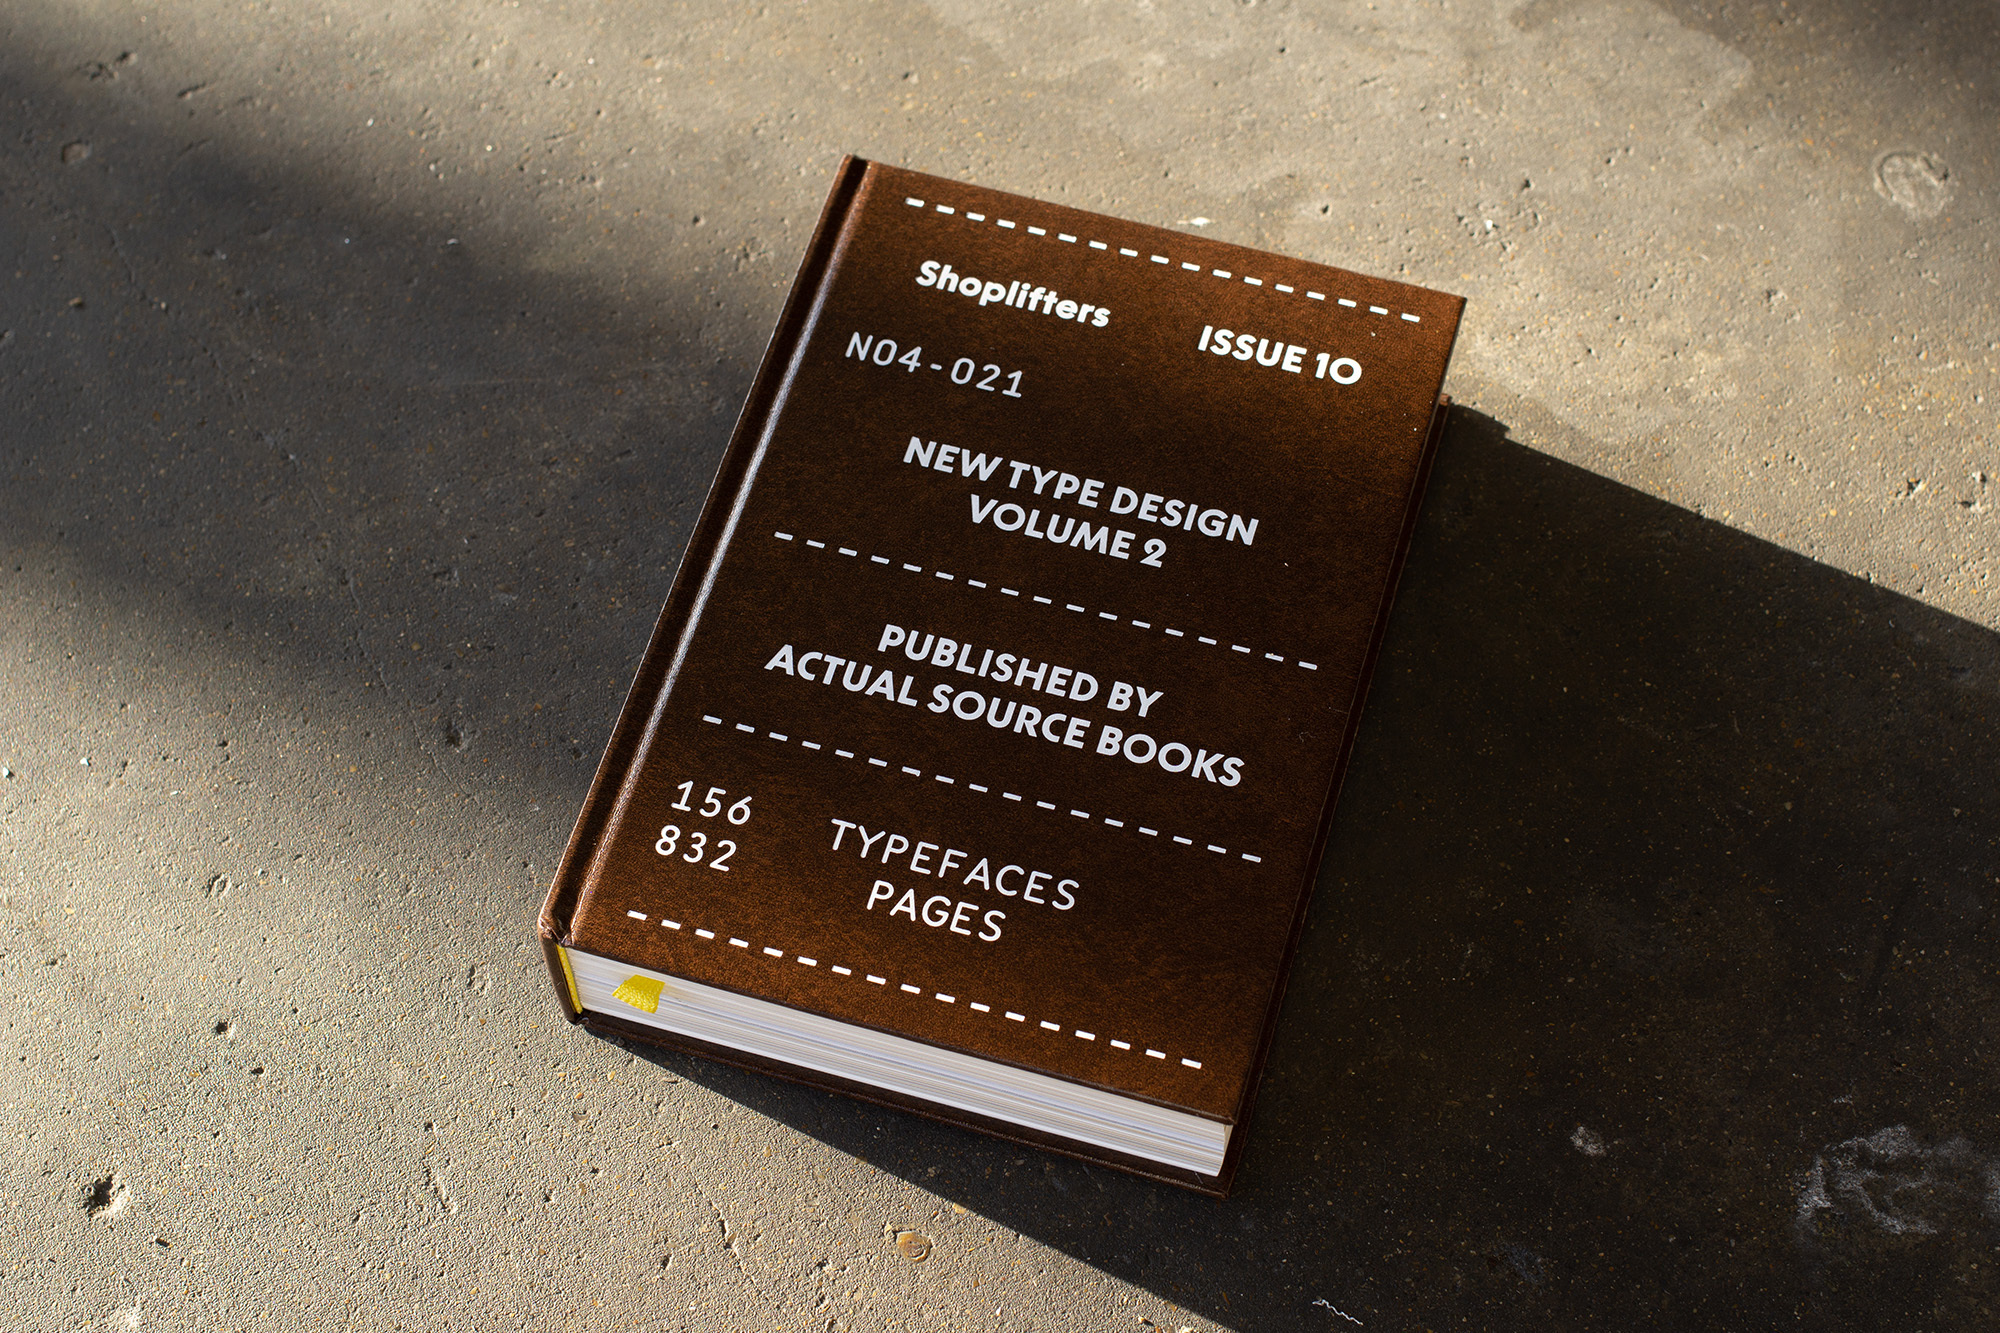 Actual Source's Shoplifters Issue 10 showcases 156 typefaces from 